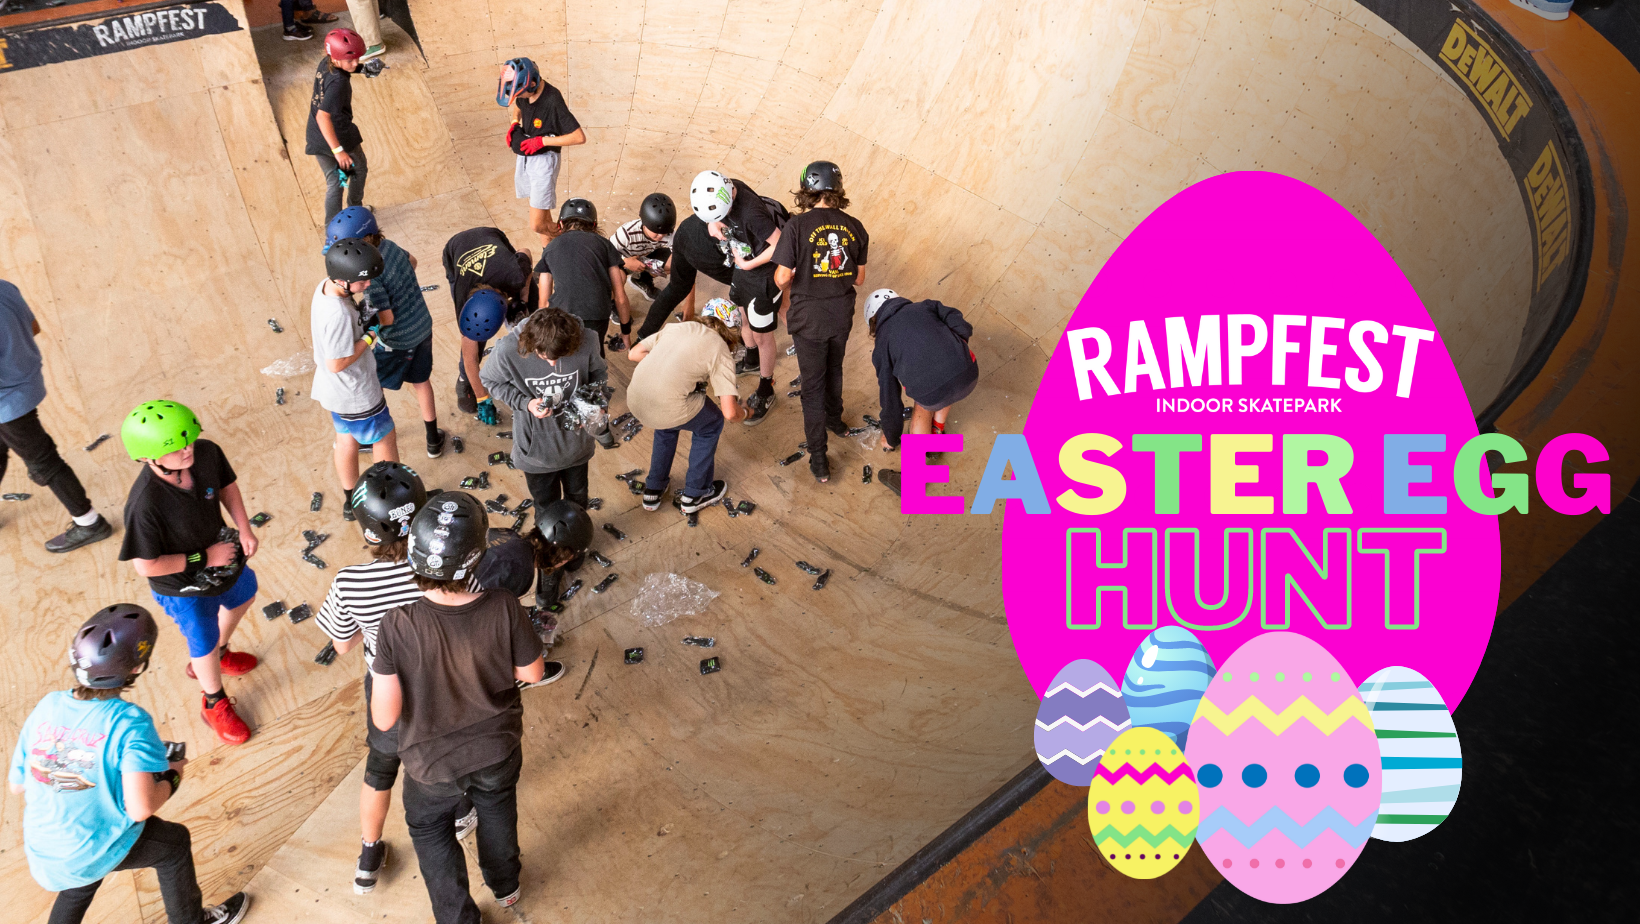 Join the RampFest Easter Egg Hunt this Monday